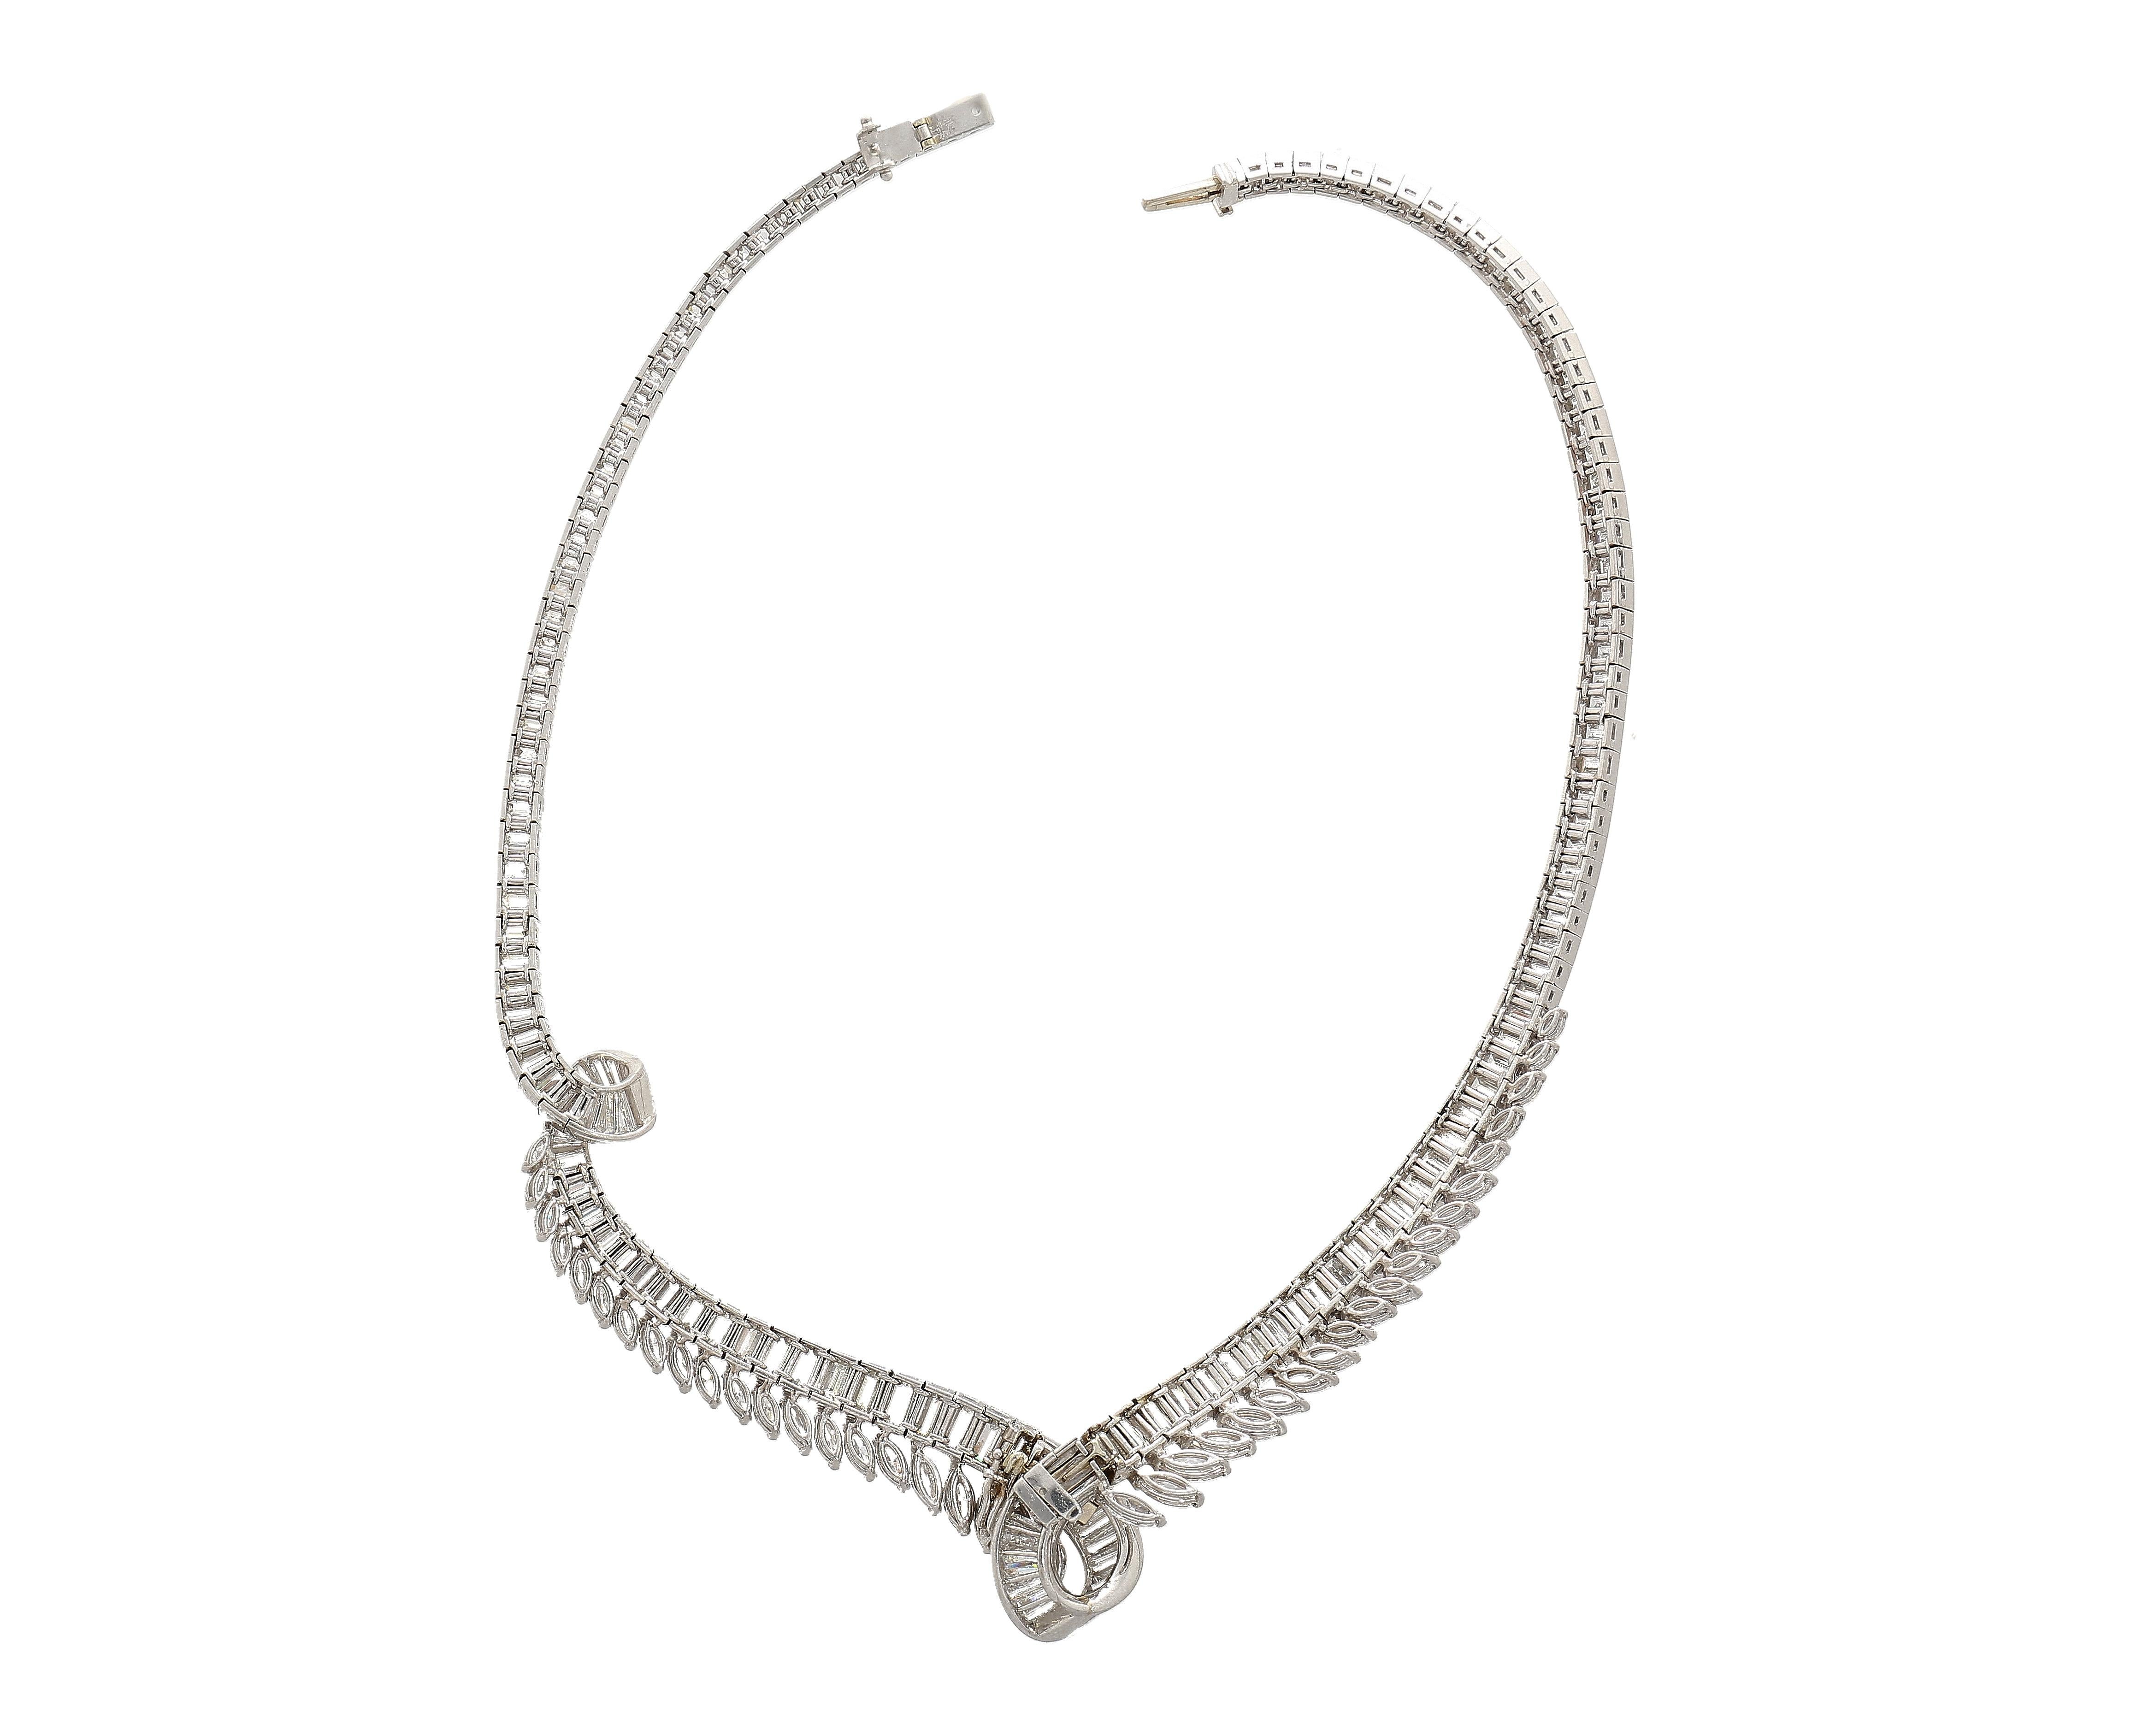 Platinum choker necklace, weighing 75.70 grams and measuring 14 inches. The necklace showcases a total of 193 Diamonds in three different cuts: 41 marquise-cut diamonds, and 152 baguette-cut diamonds. All bearing eye-clean clarity and F-G color. The